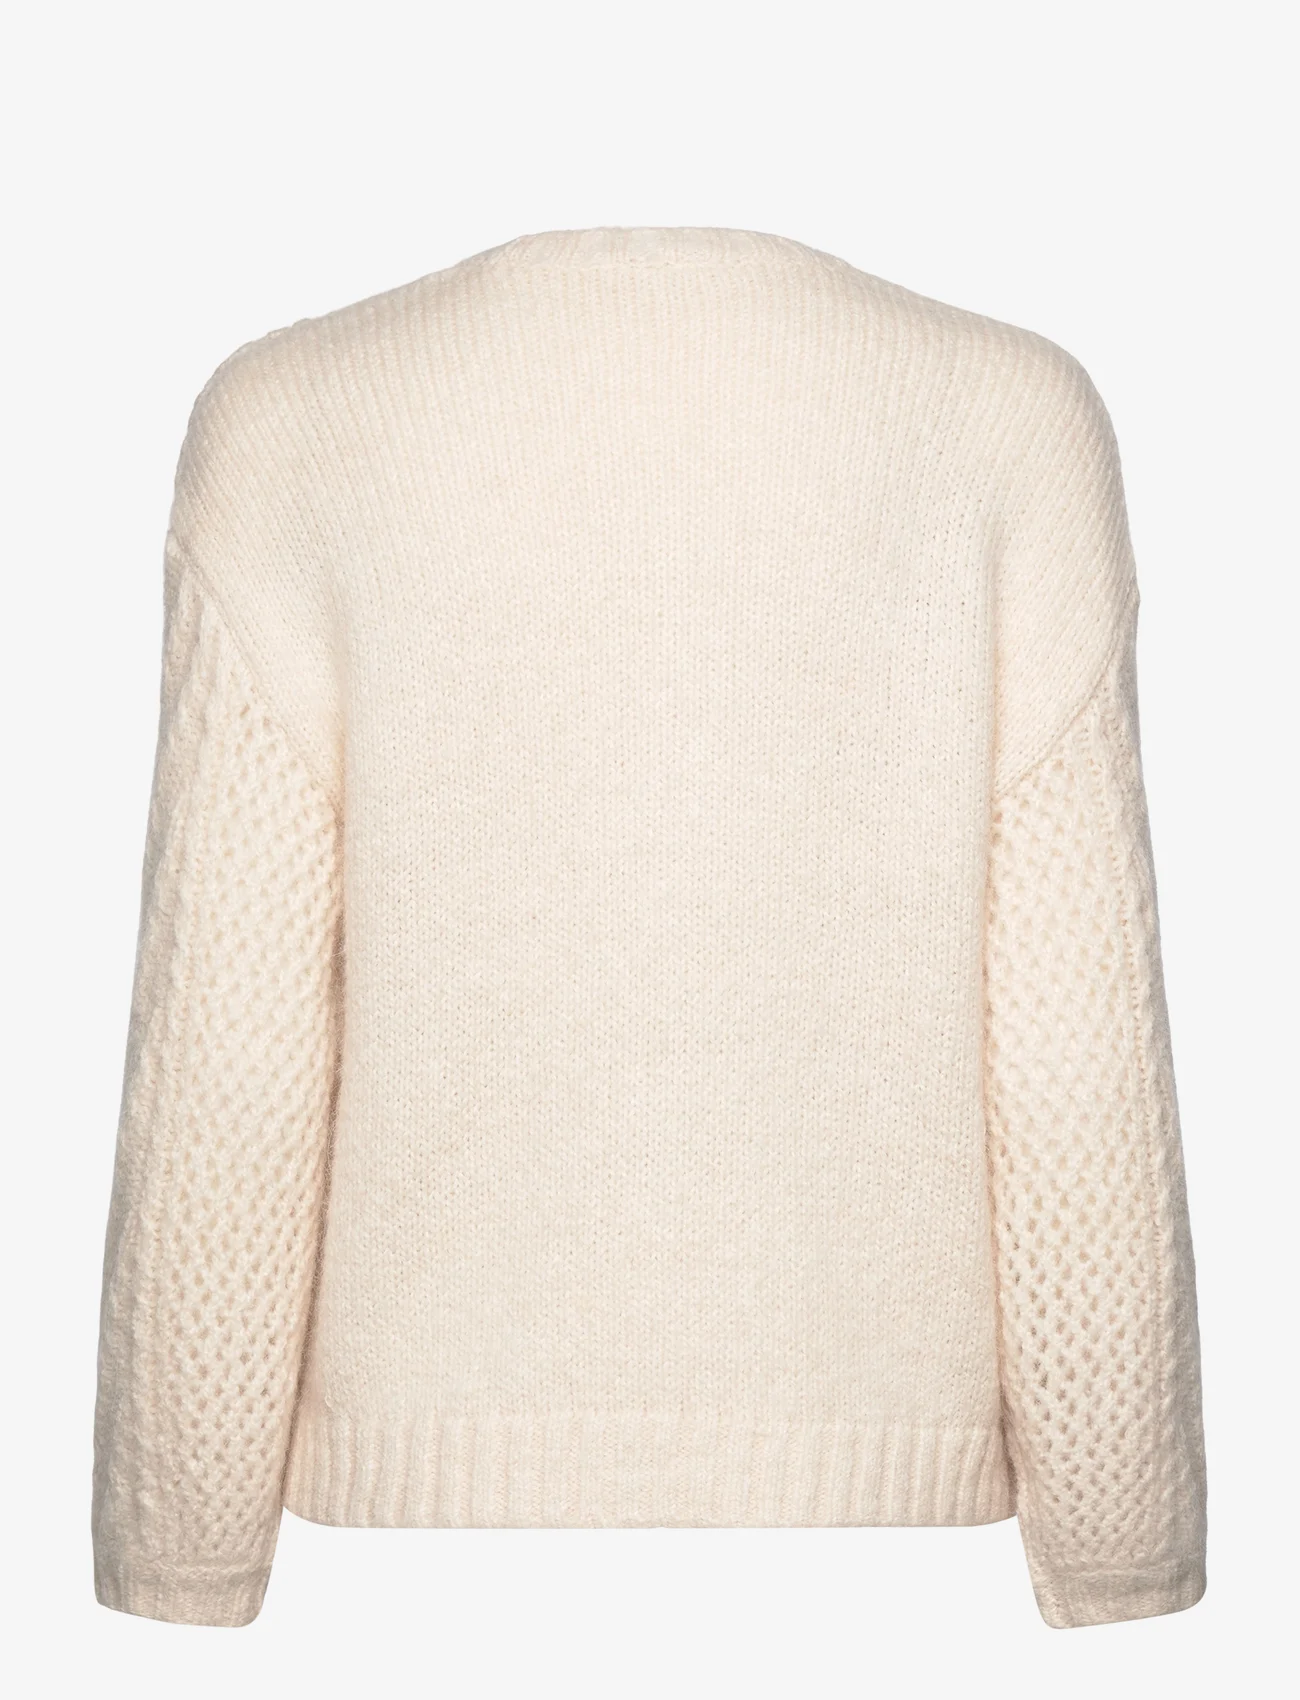 Dante6 - D6Flory cable sweater - jumpers - butter cream - 1